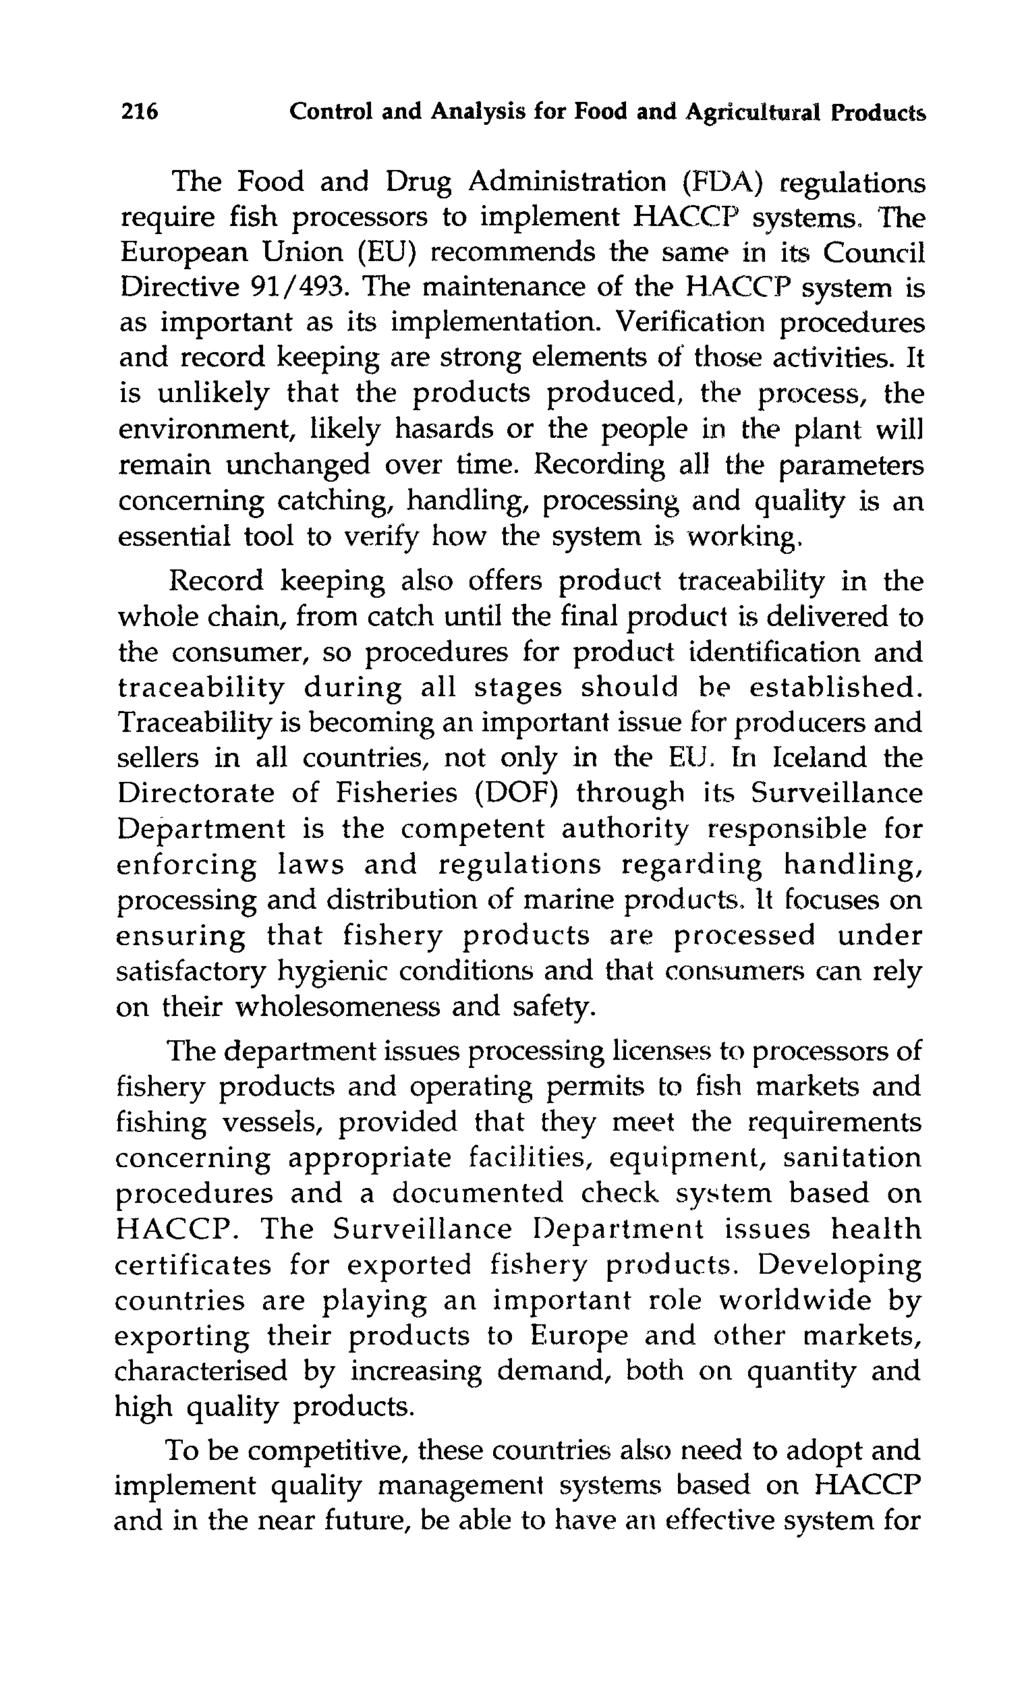 216 Control and Analysis for Food and Agricultural Product~ The Food and Drug Administration (FDA) regulations require fish processors to implement HACCP systems.